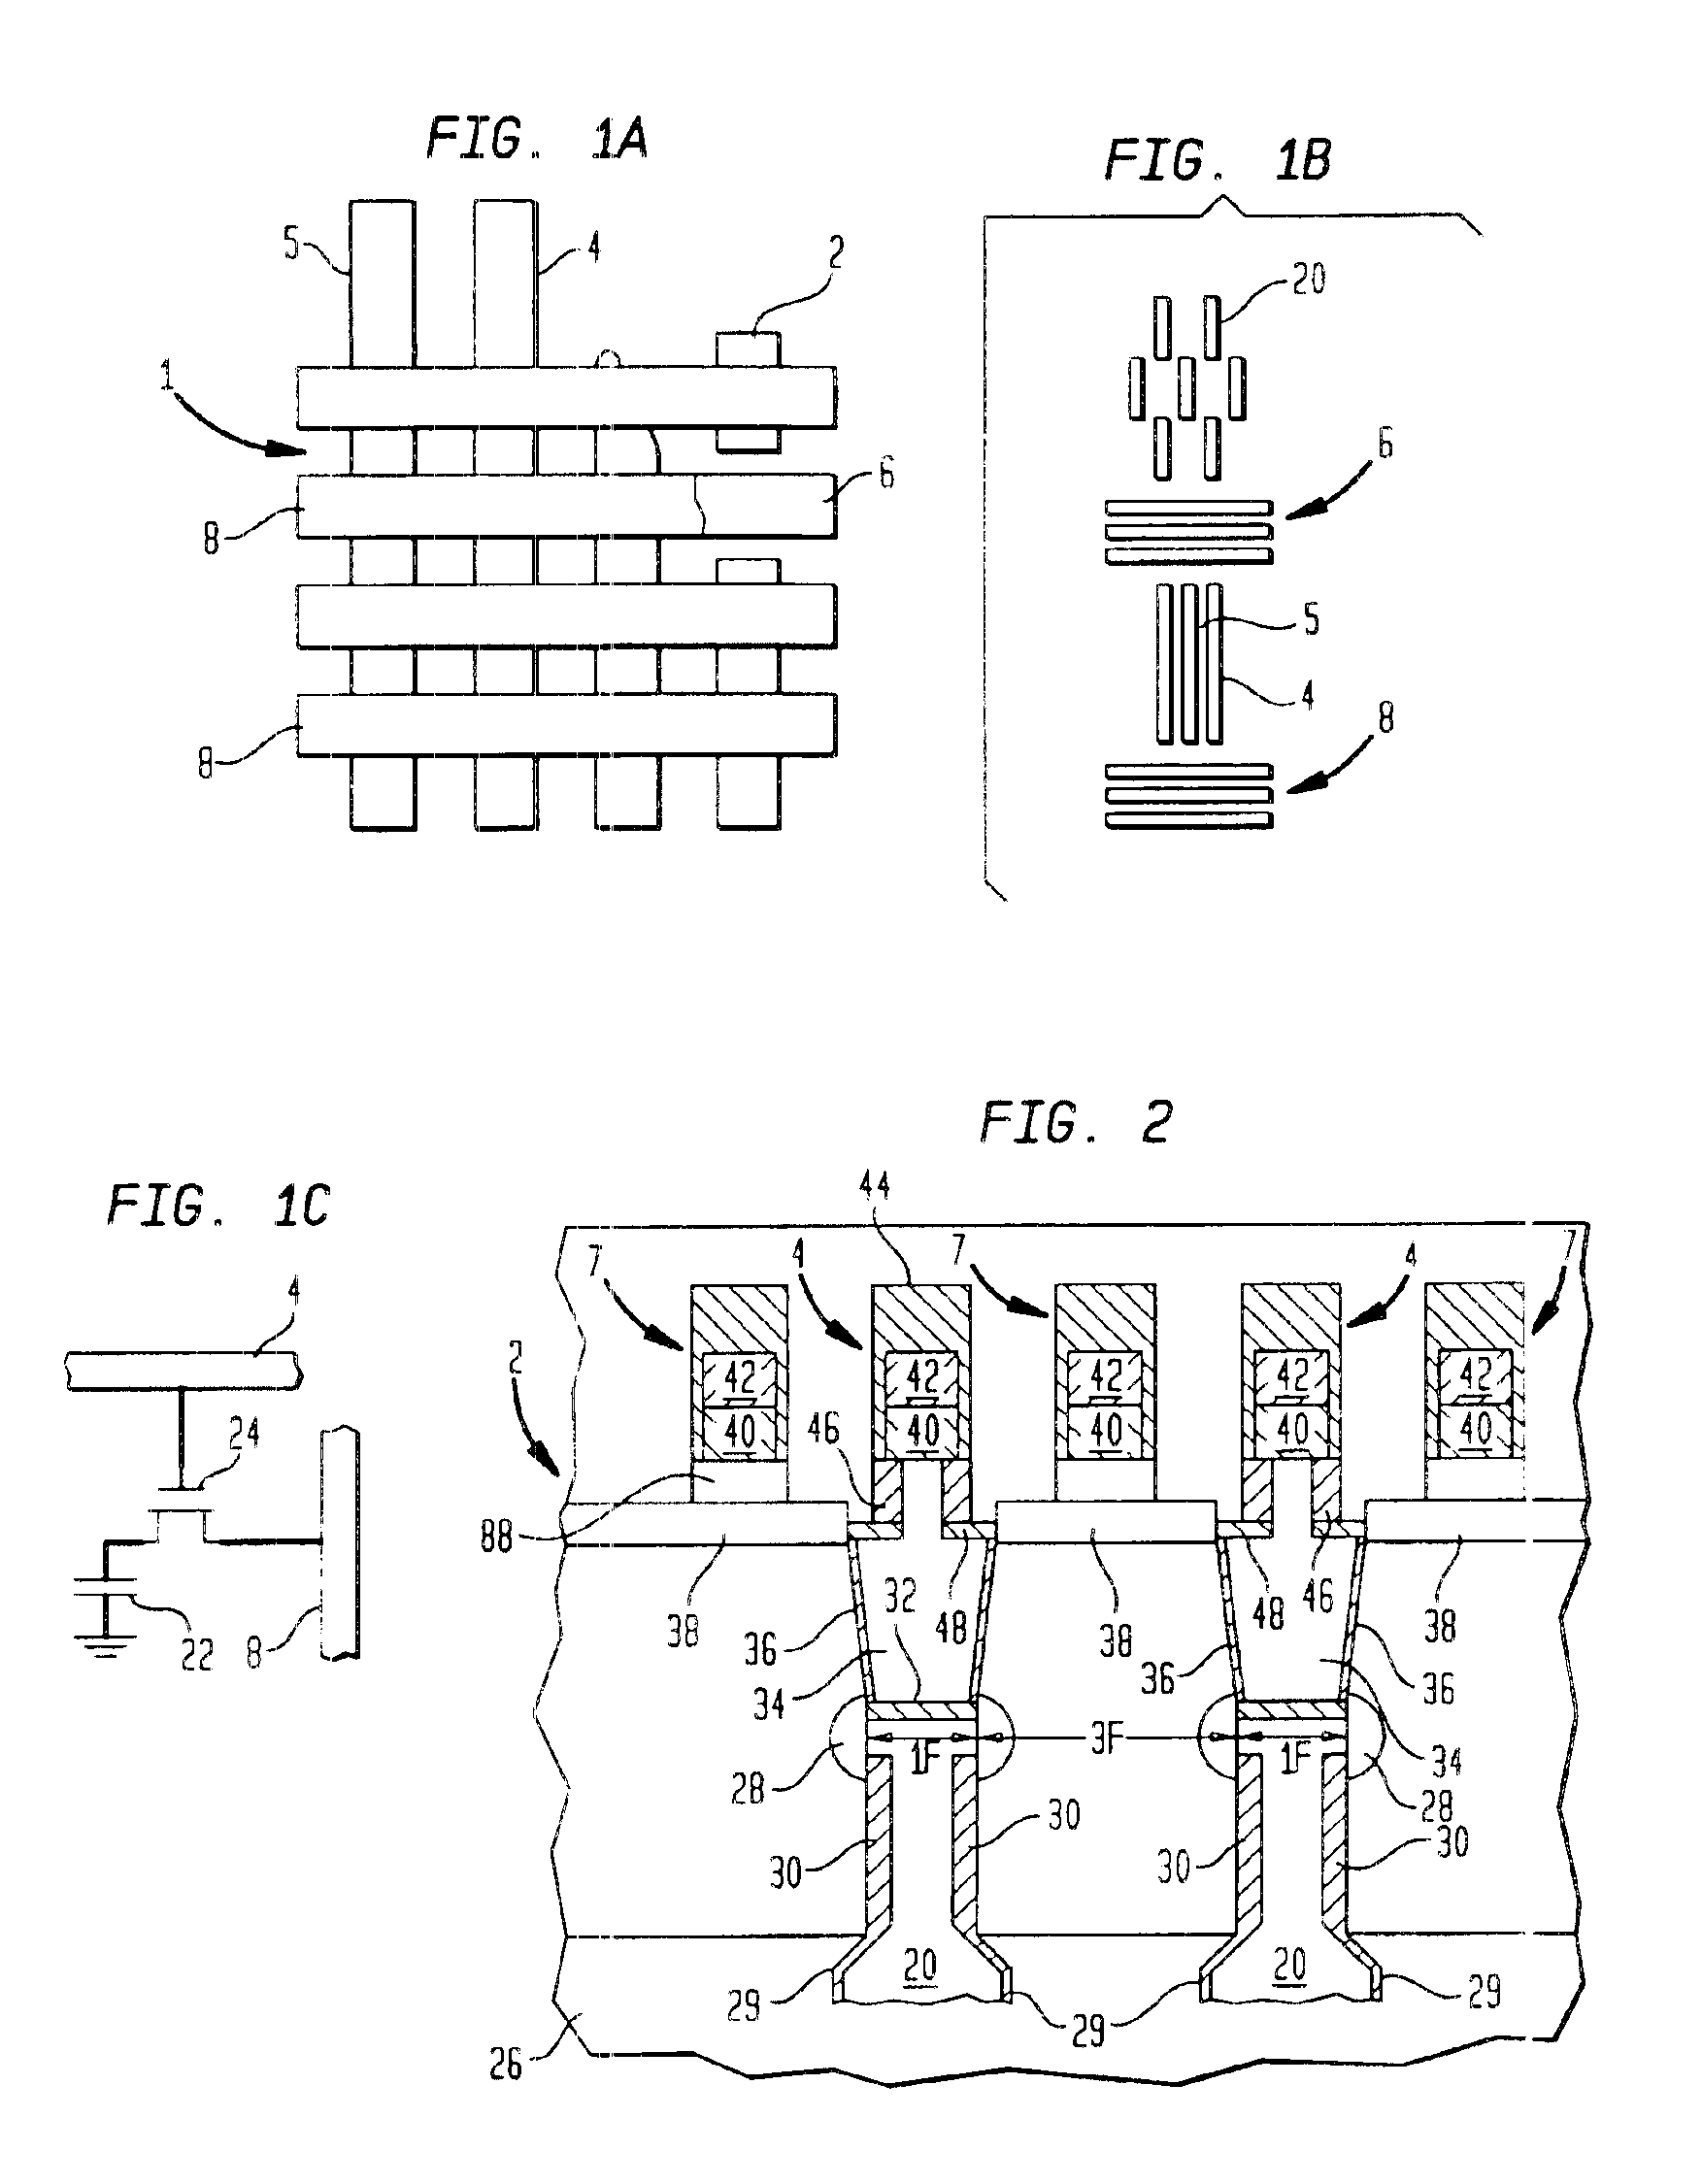 Vertical 8F2 cell dram with active area self-aligned to bit line